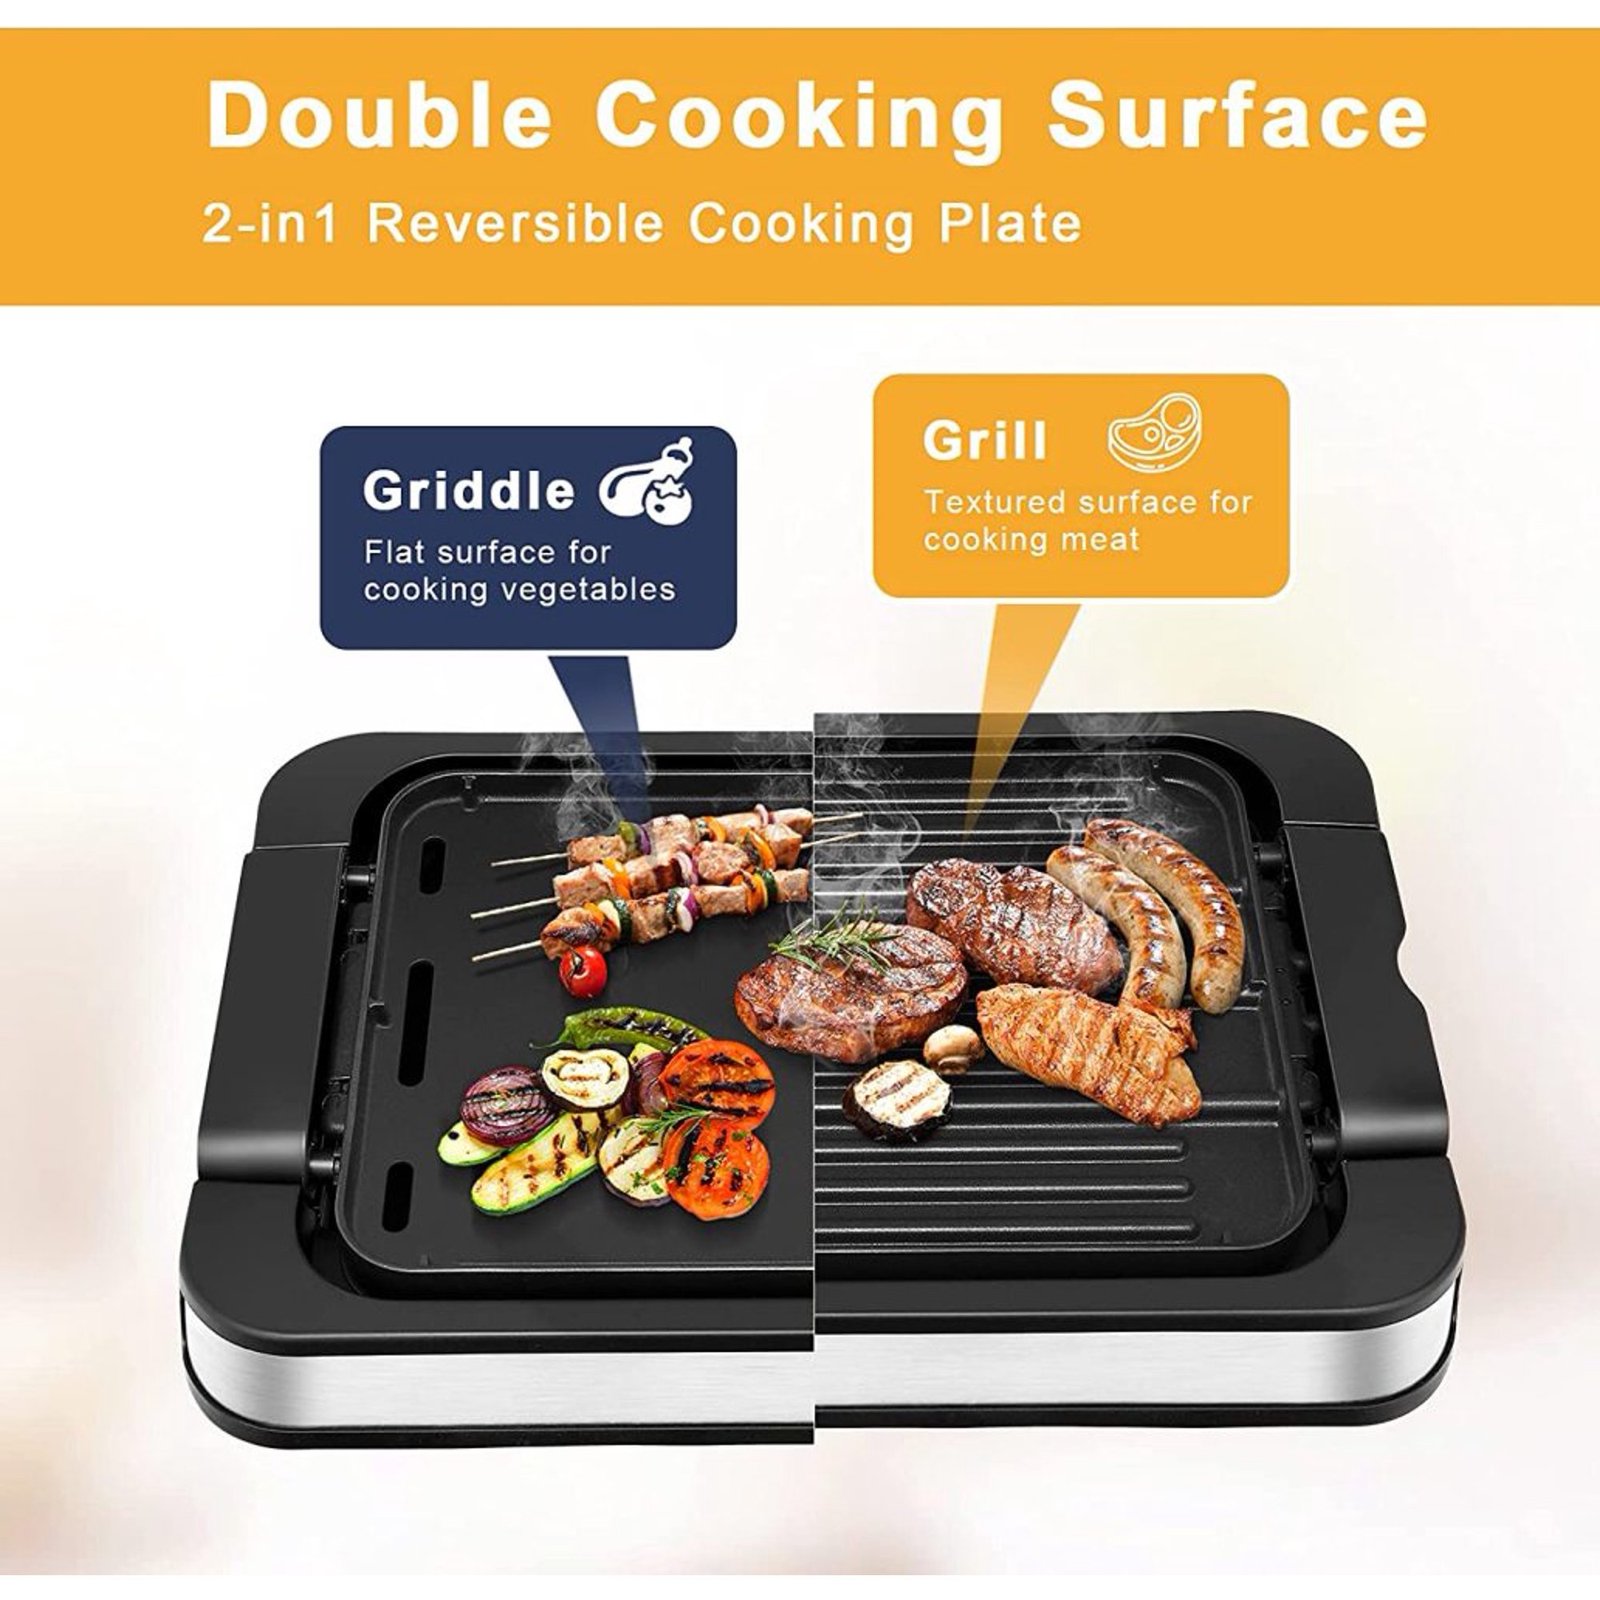 https://themarketdepot.com/wp-content/uploads/2023/01/Costzon-Indoor-Smokeless-Grill-1500W-Electric-BBQ-Griddle-Contact-Grilling-with-Removable-Drip-Tray-2-in-1-Nonstick-Grill-with-Reversible-Plate-Temperature-Control-Dishwasher-safe-5.jpeg